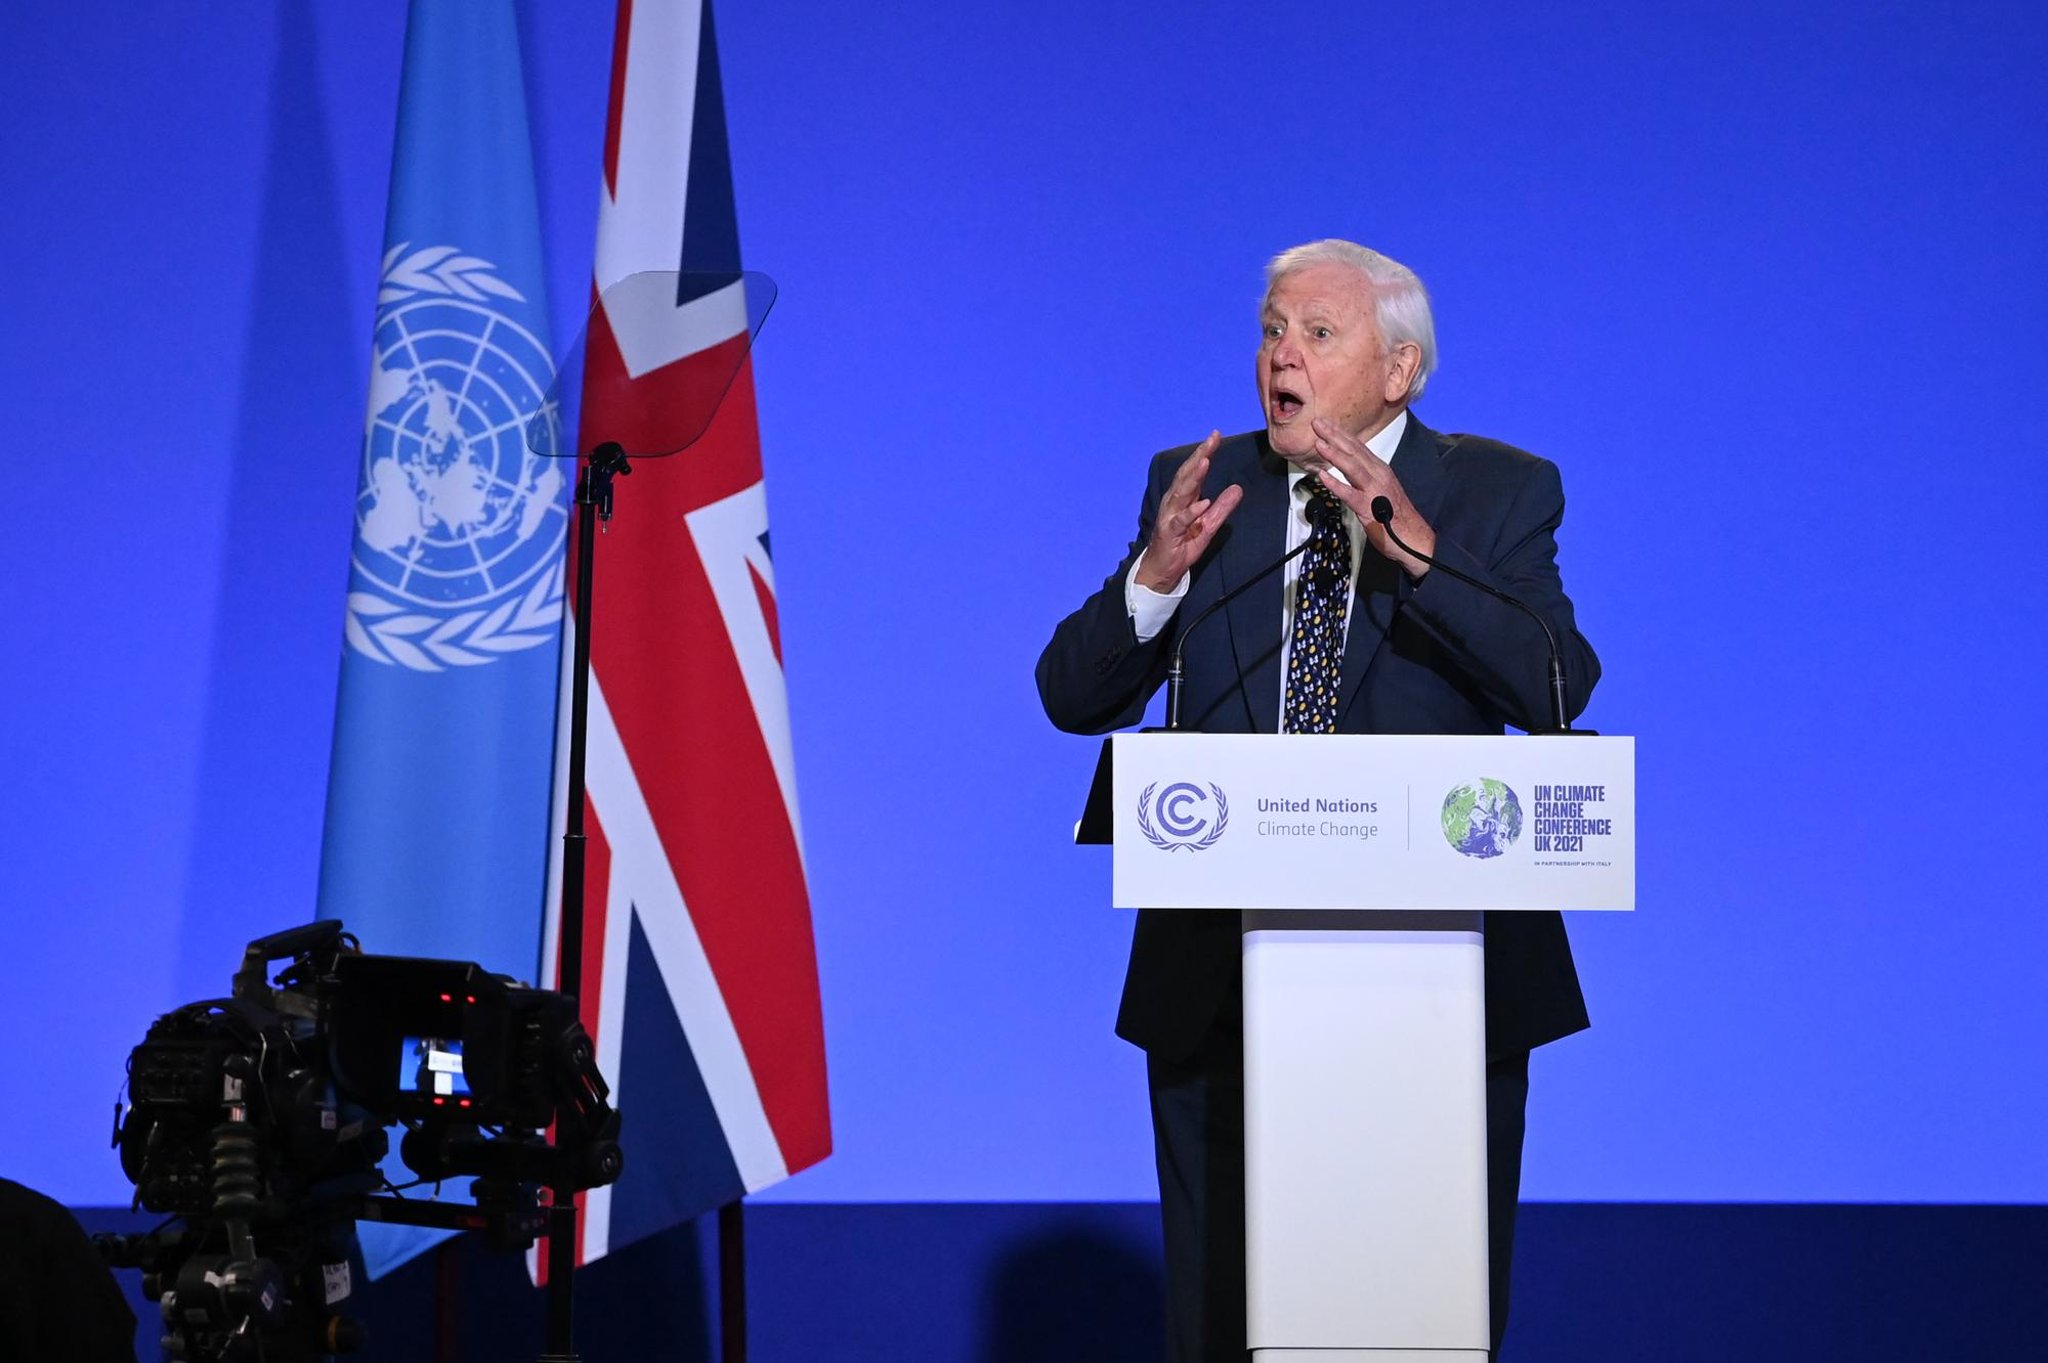 COP26: Sir David Attenborough tells world leaders that humanity is 'already  in trouble' at Glasgow climate conference | The Scotsman